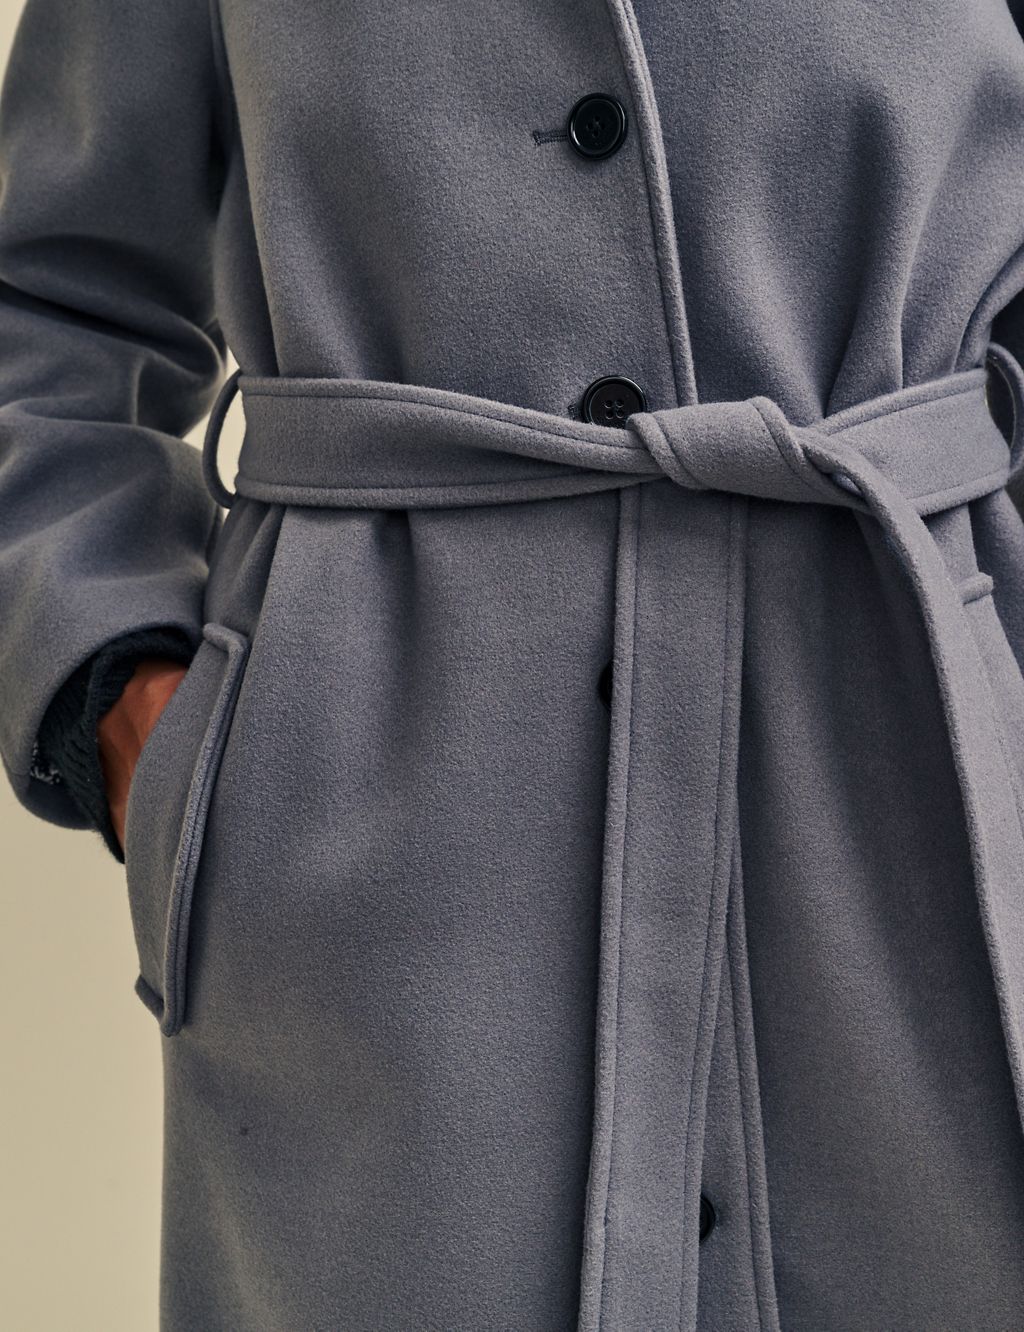 Belted Collared Longline Tailored Coat | Nobody's Child | M&S